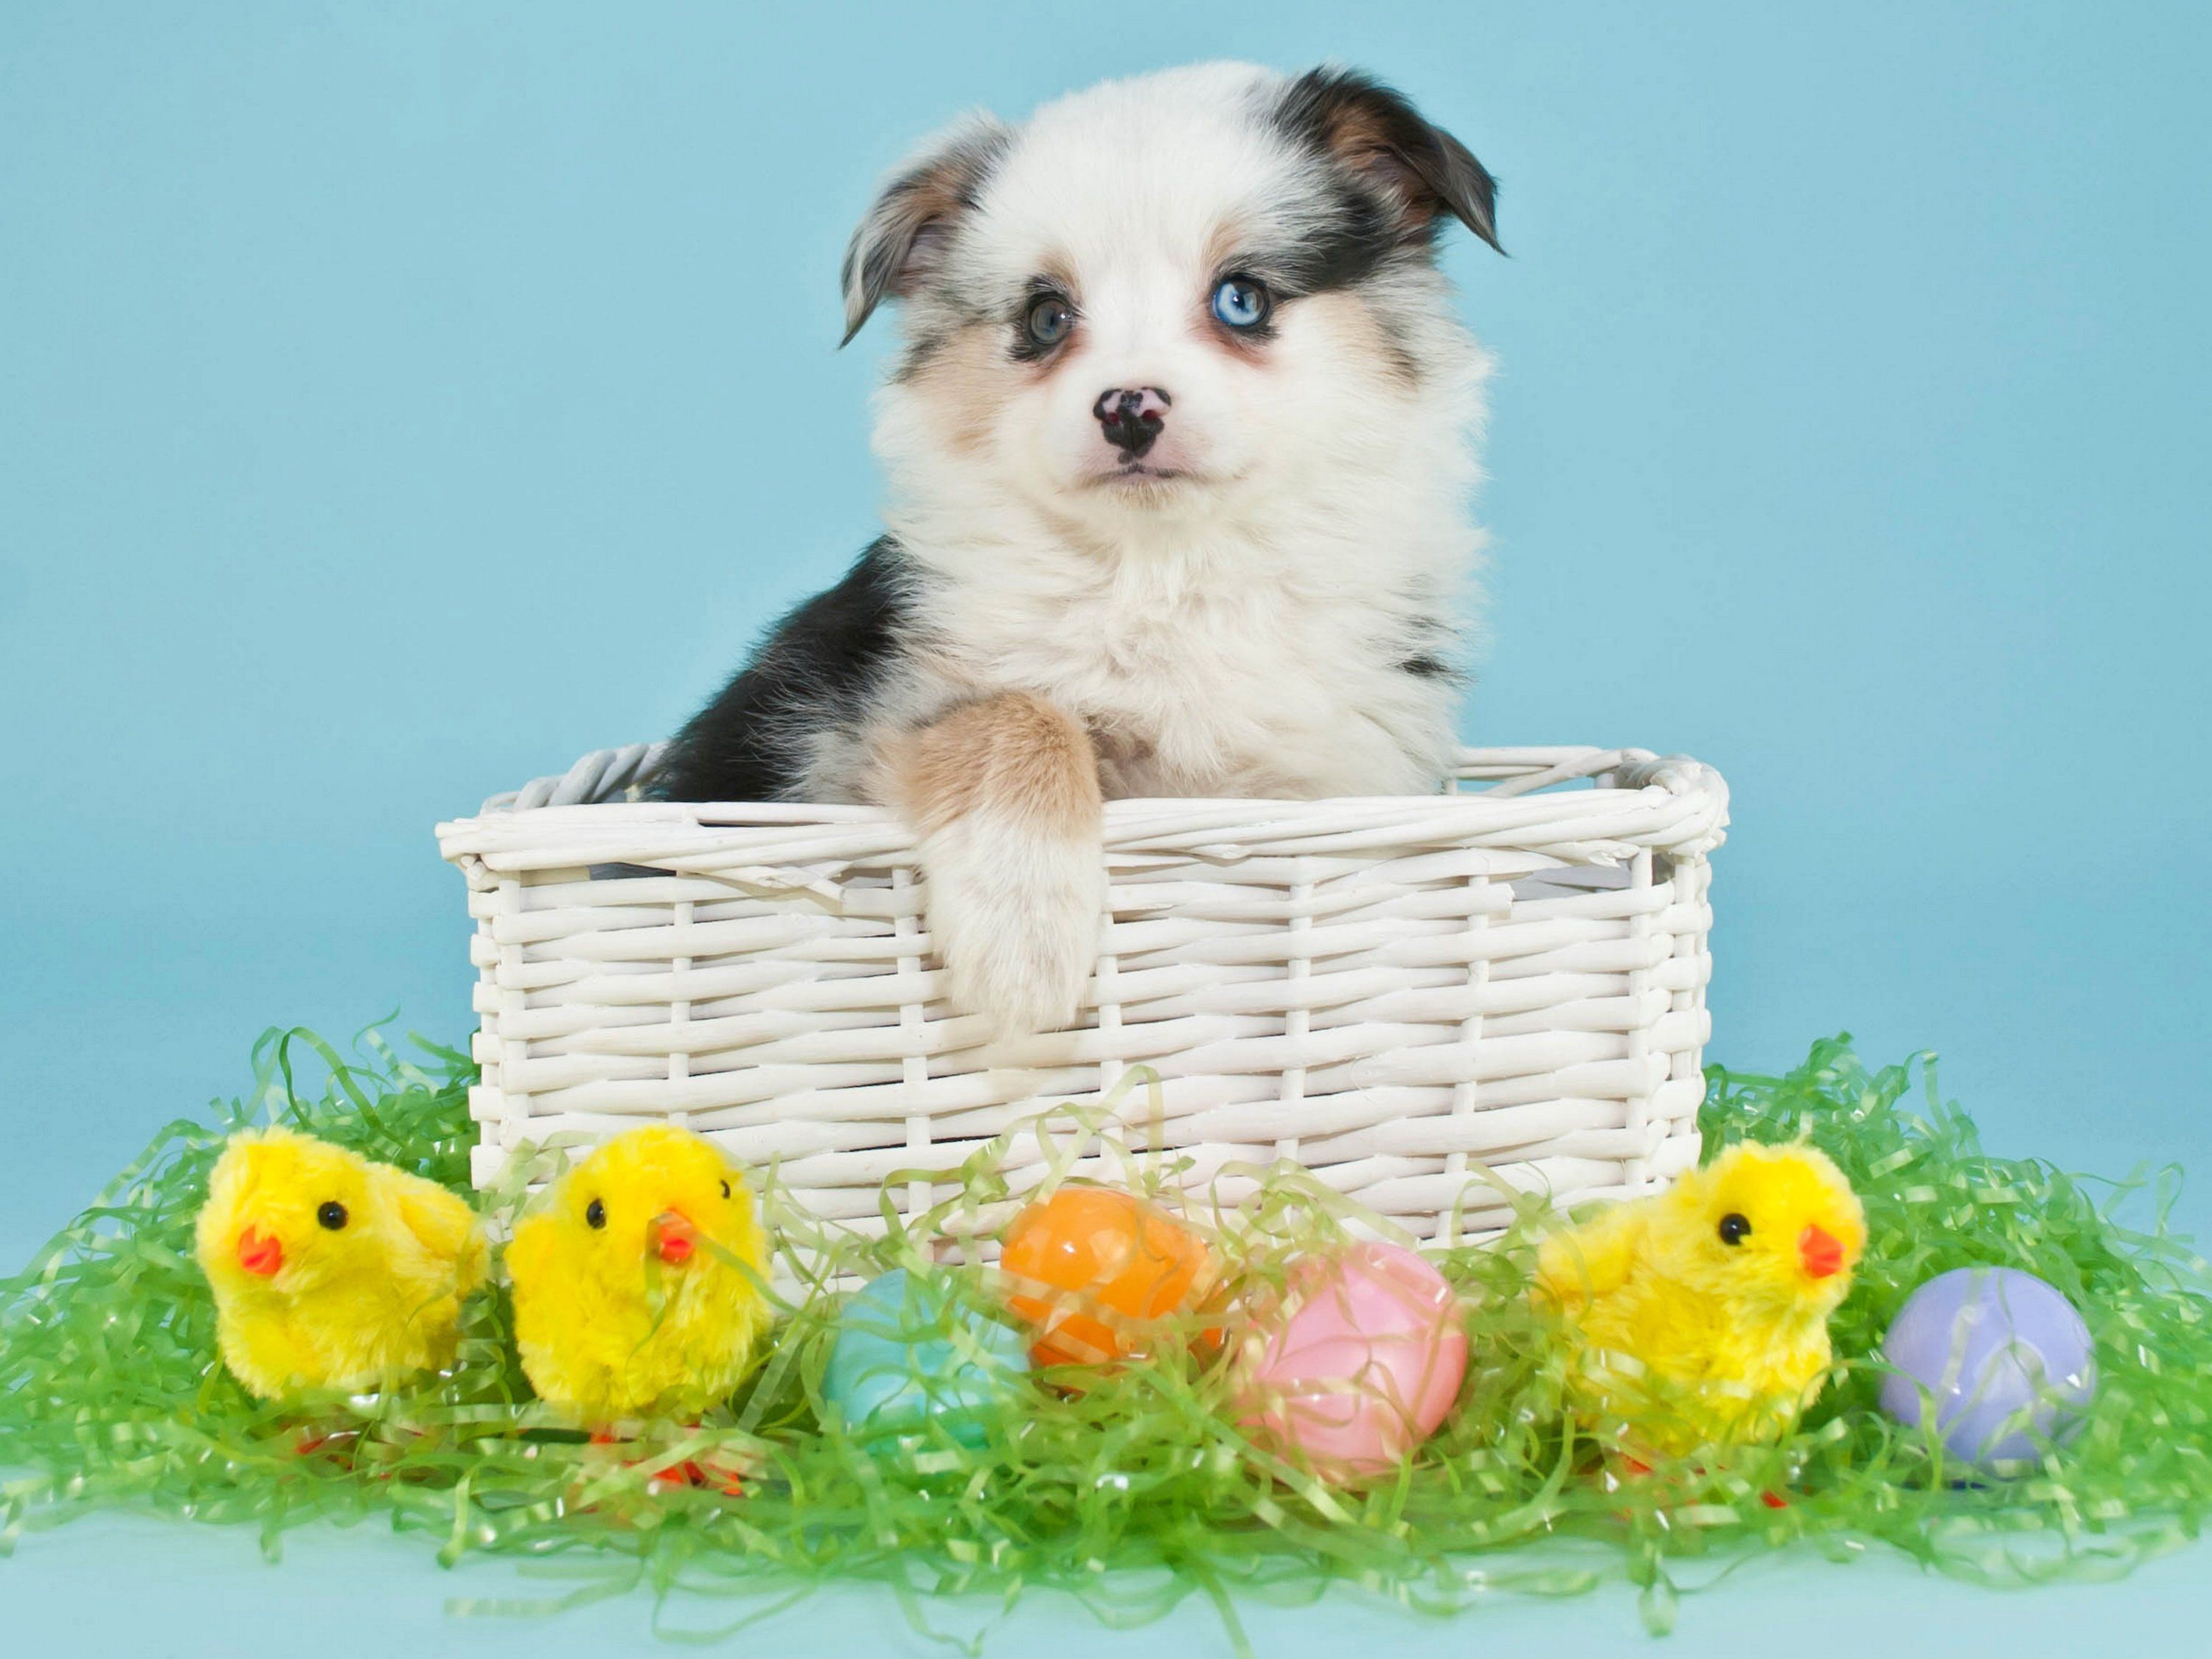 Dogs Holidays Easter Chickens Puppy Wicker basket Eggs Animals